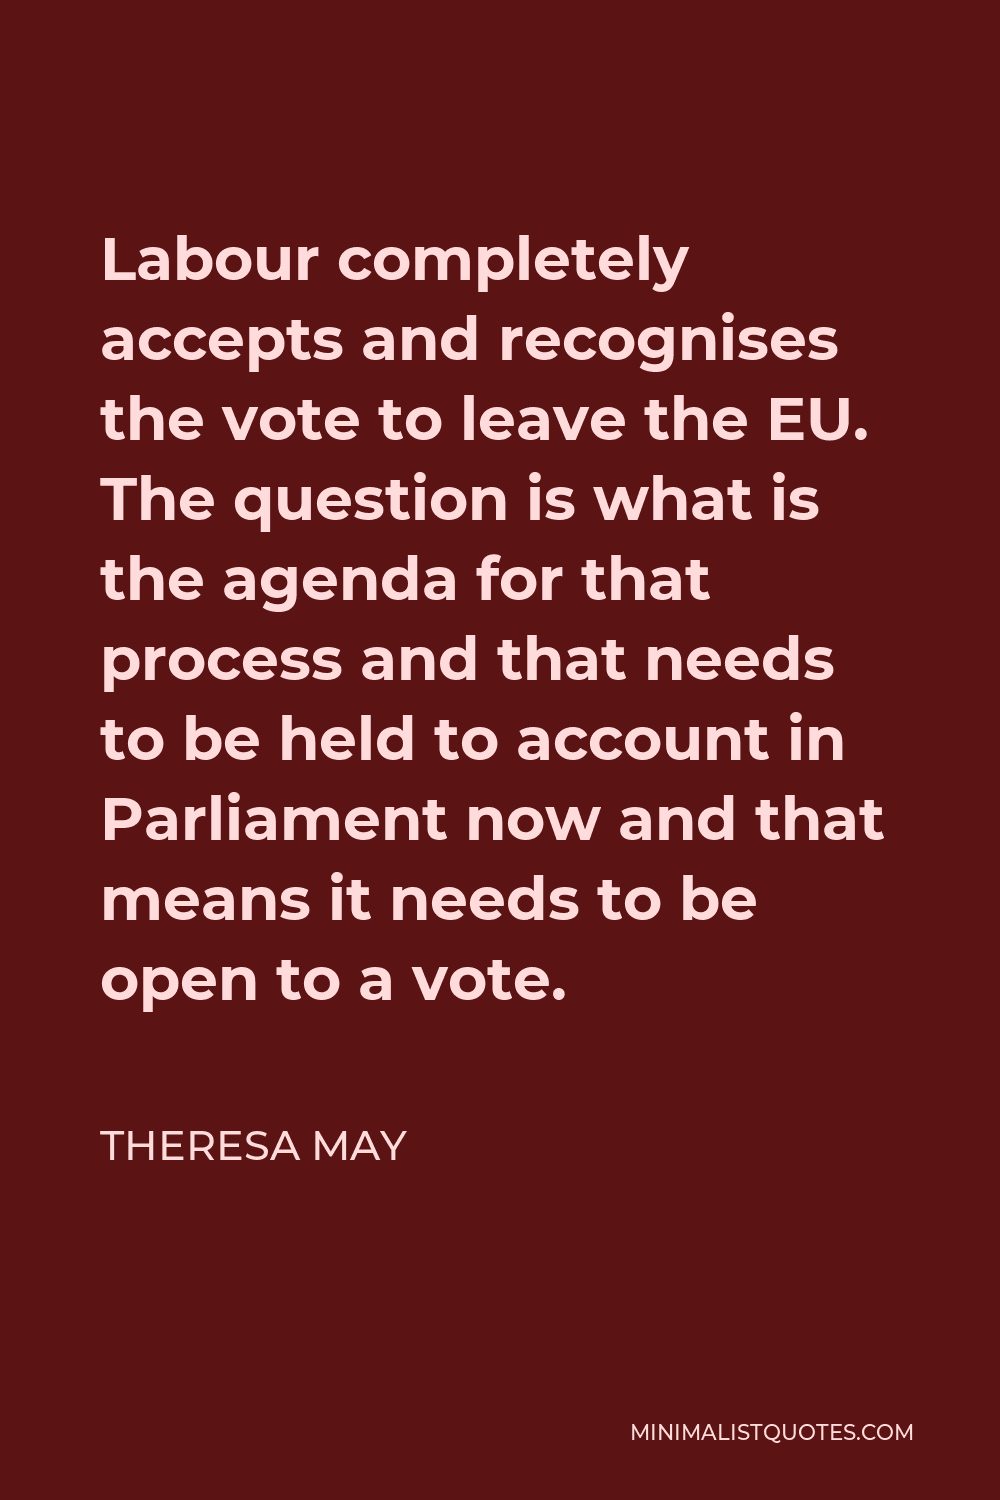 Theresa May Quote - Labour completely accepts and recognises the vote to leave the EU. The question is what is the agenda for that process and that needs to be held to account in Parliament now and that means it needs to be open to a vote.